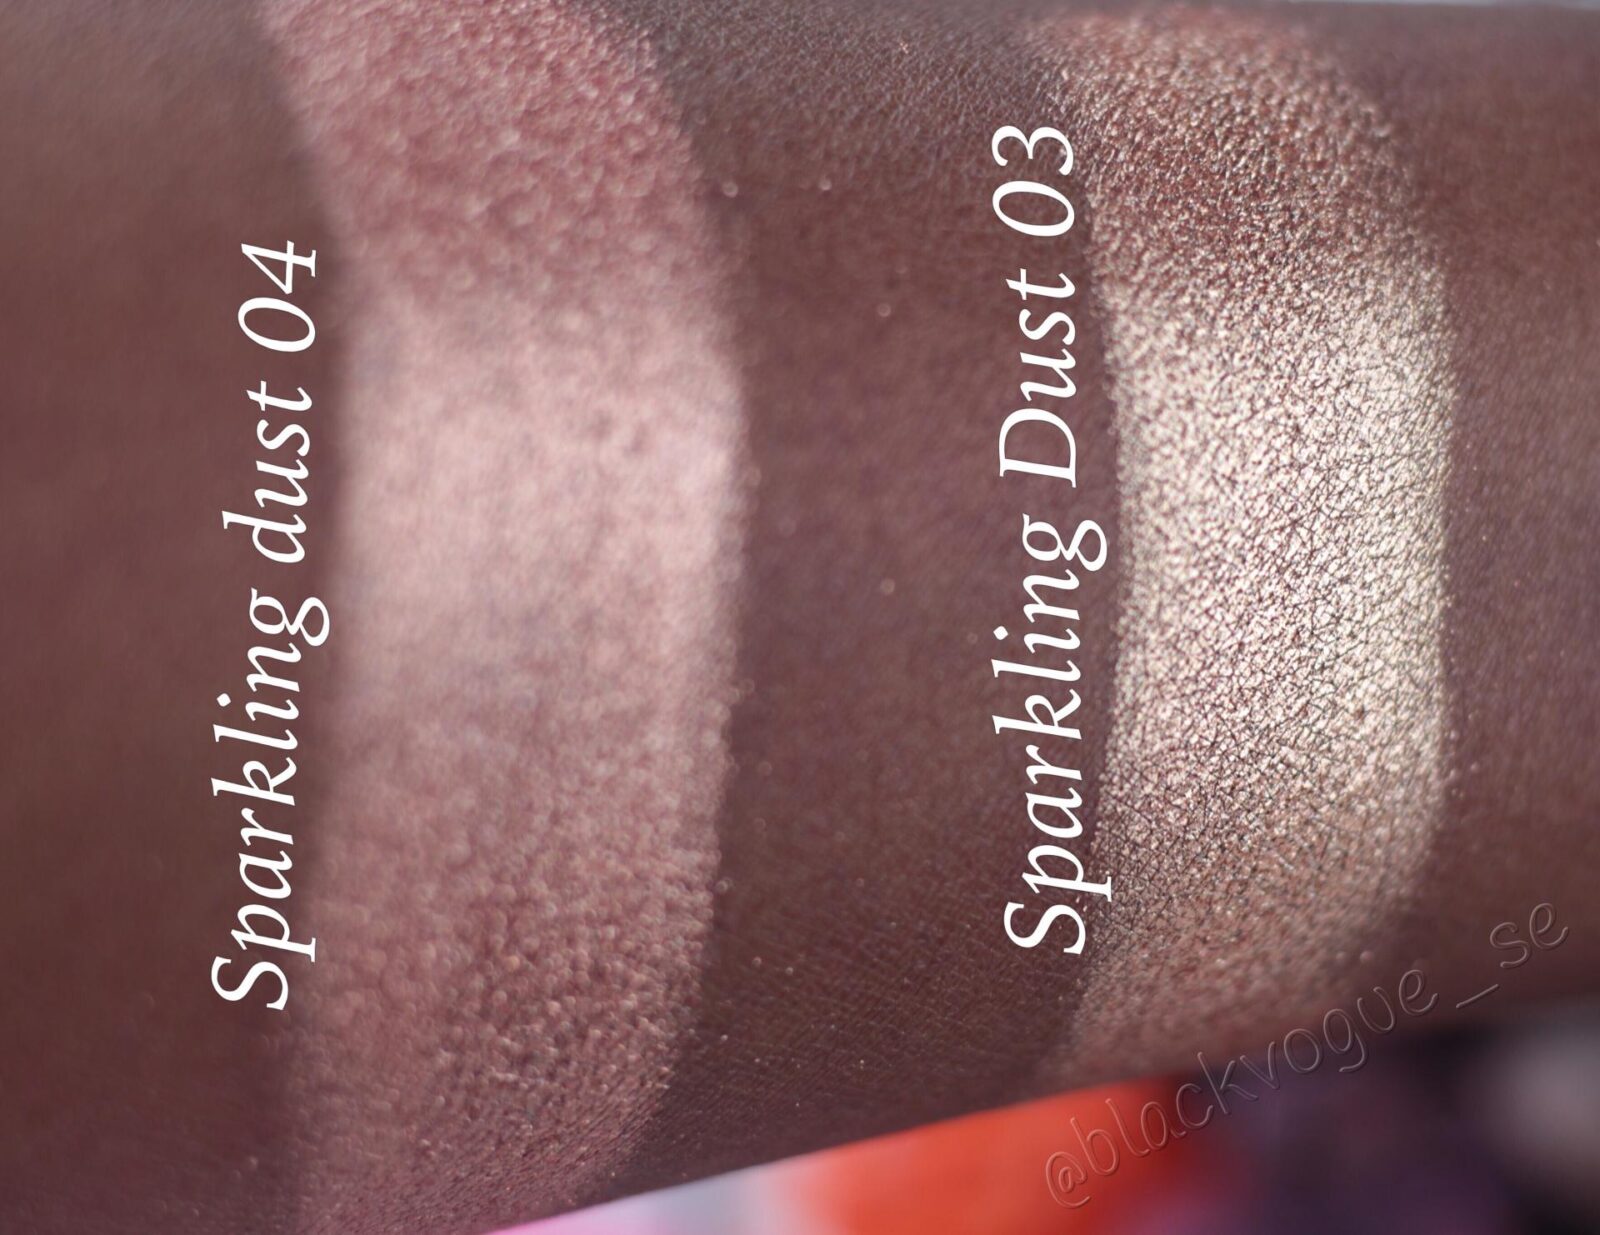 Inglot sparkling dust swatches